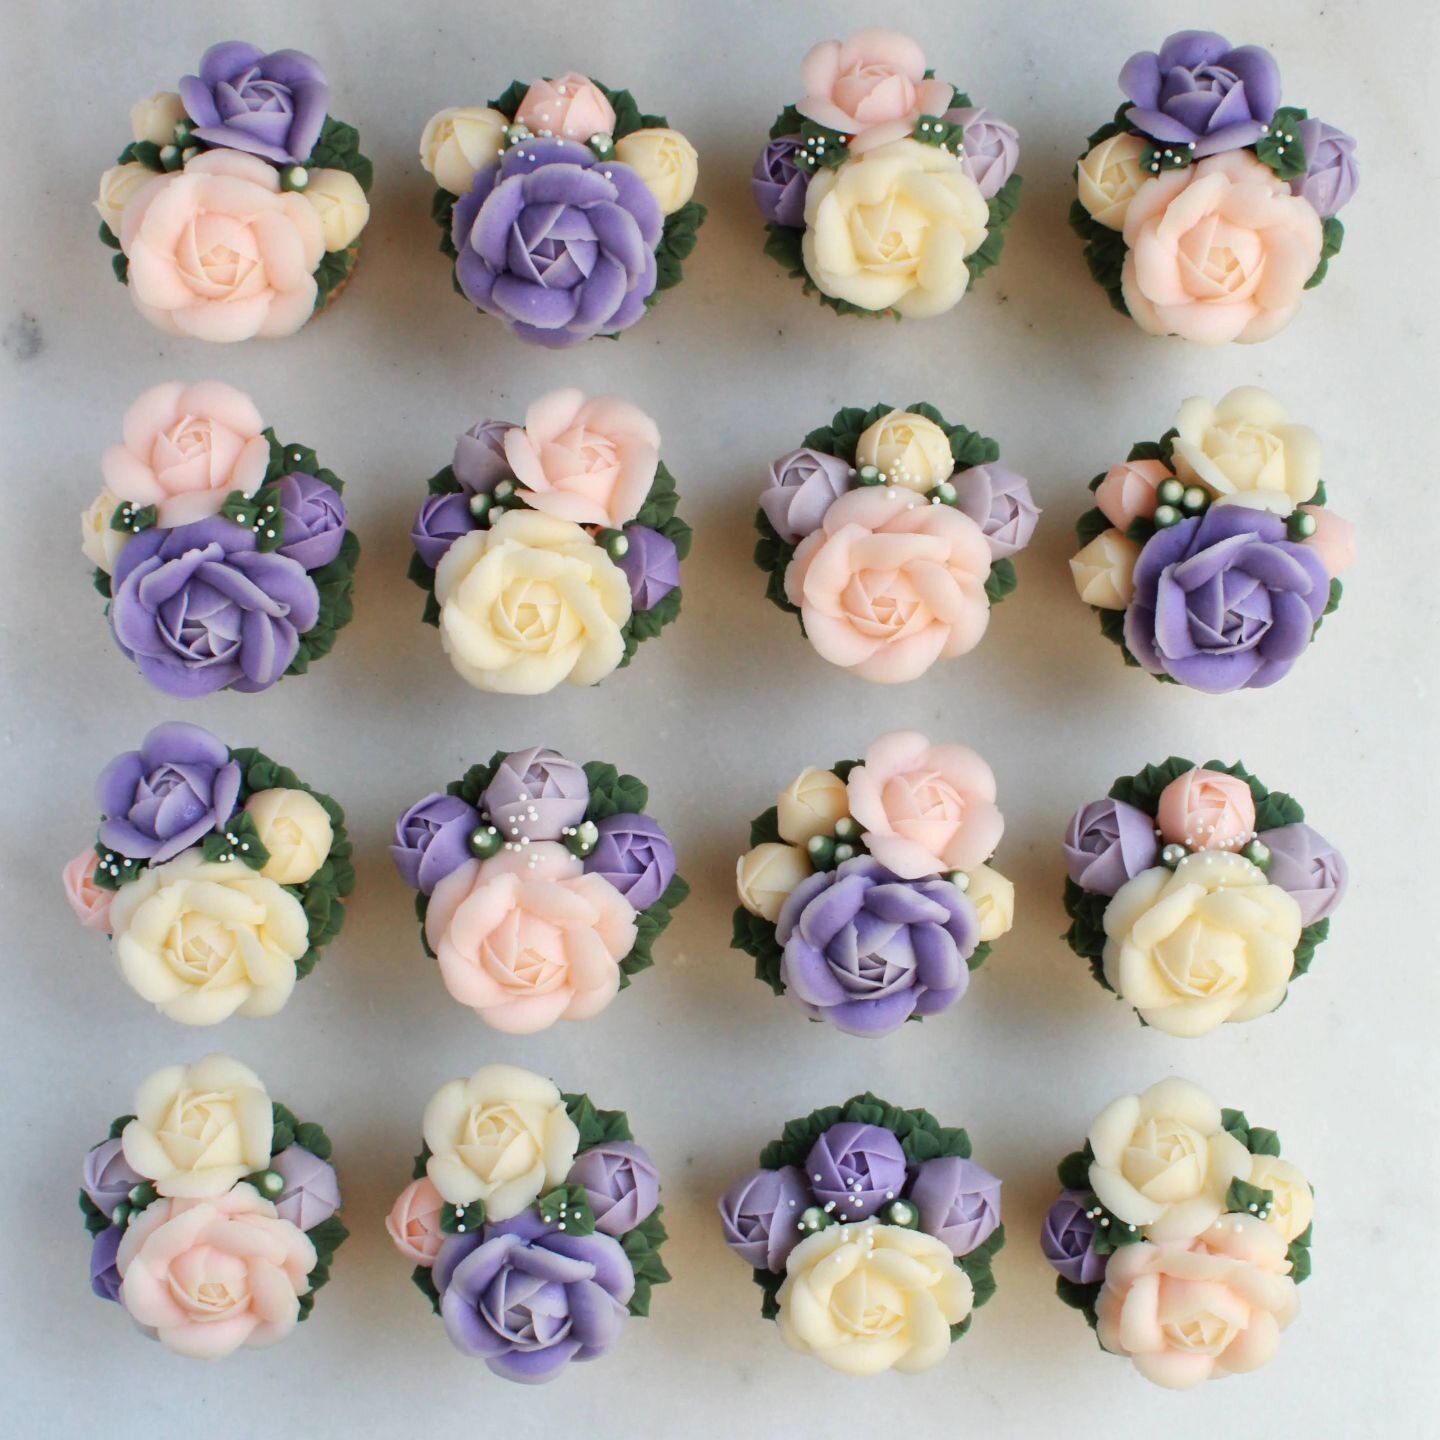 Pastel roses for a sweet baby shower this past weekend 🌸💐

Flavor: Vanilla cupcakes with vanilla buttercream blooms
.
.
.
#karinasconfectioneries #orlandobakers #orlandobakery #orlandodesserts #orlandocookies #orlandomacarons #orlandocakes #orlando